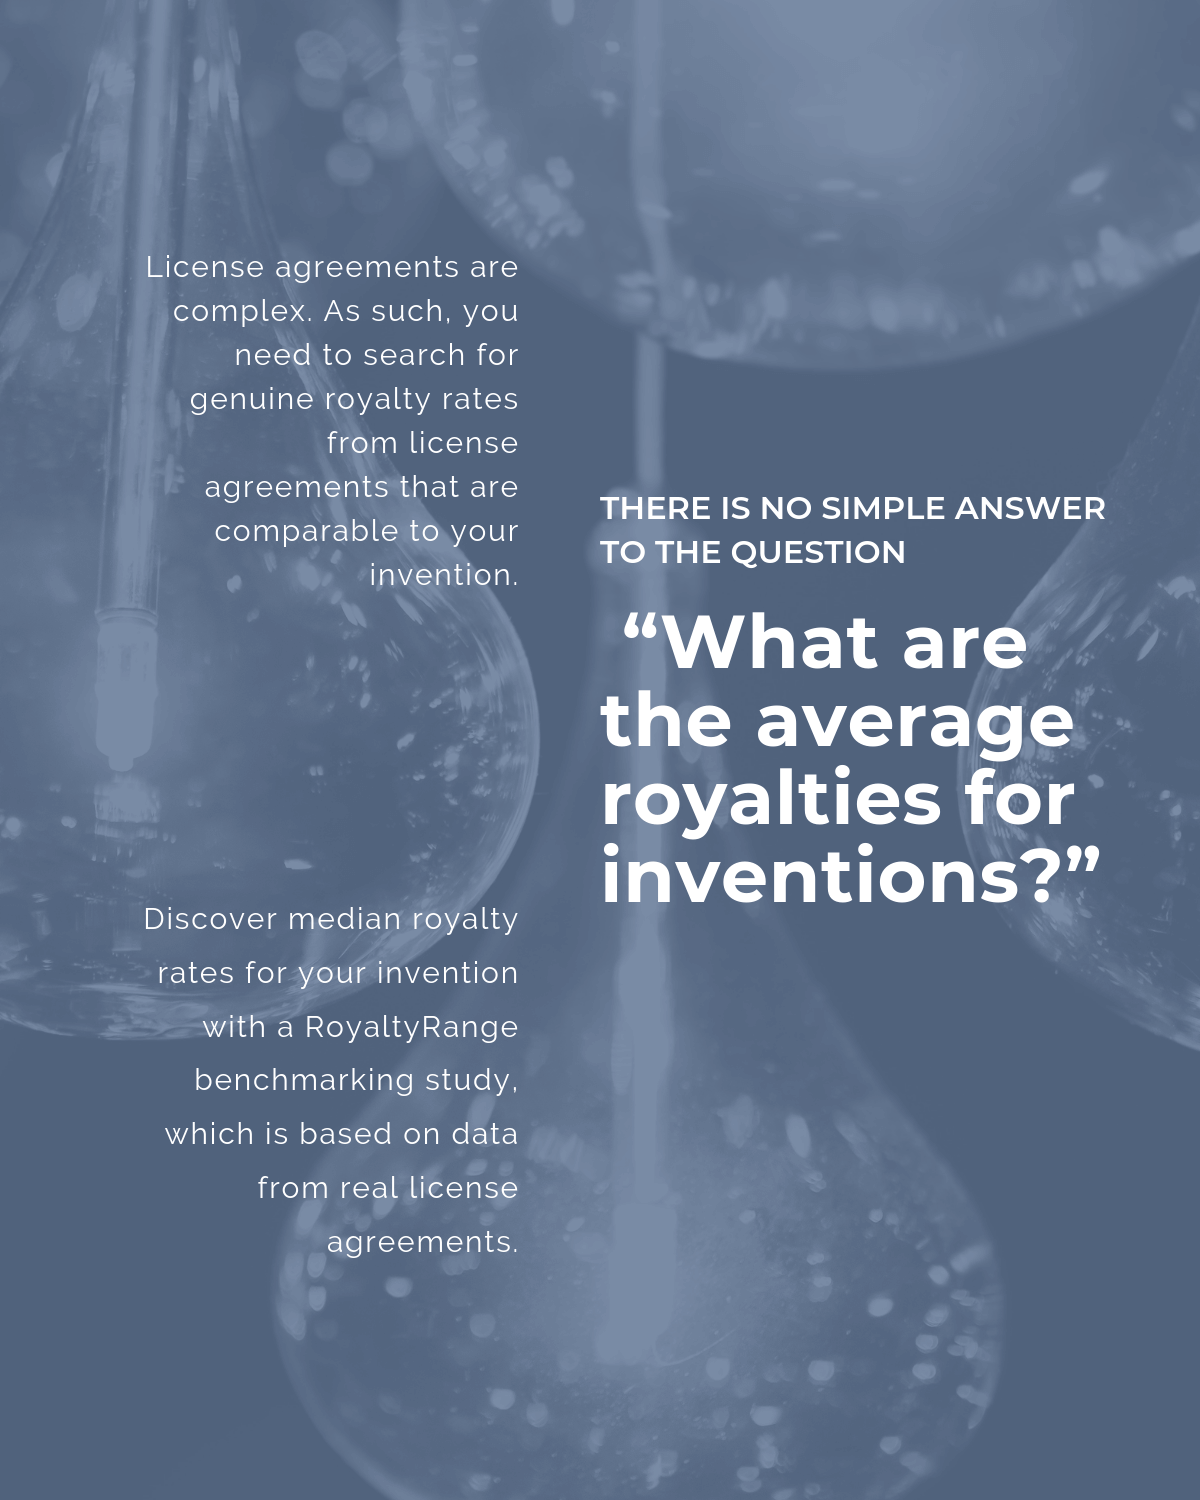 What are the average royalties for inventions